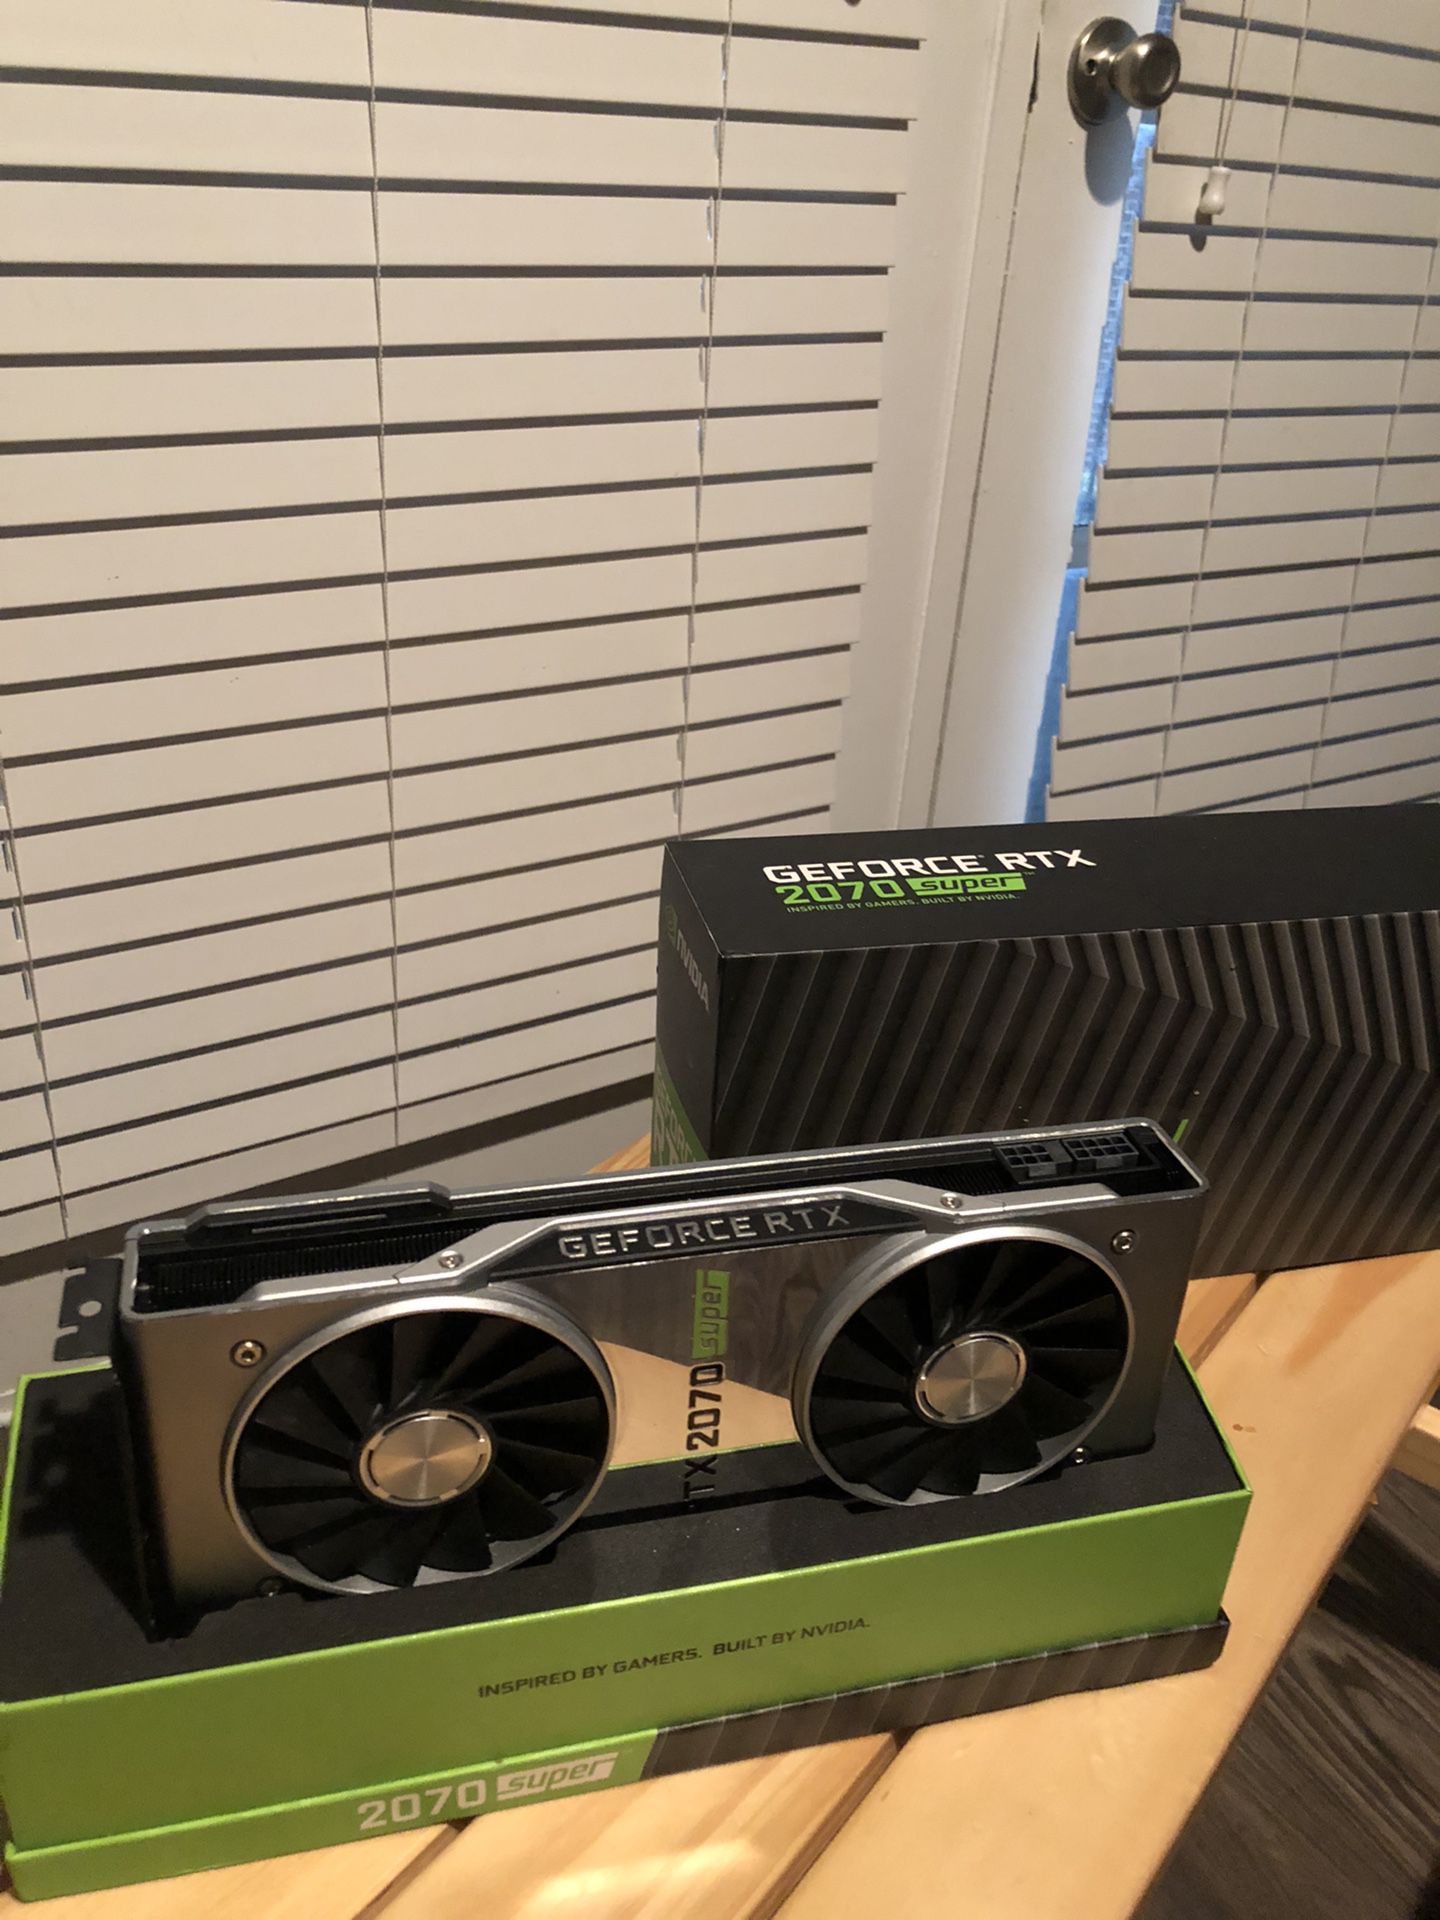 Rtx 2070 Super Founders Edition for Sale Houston, TX